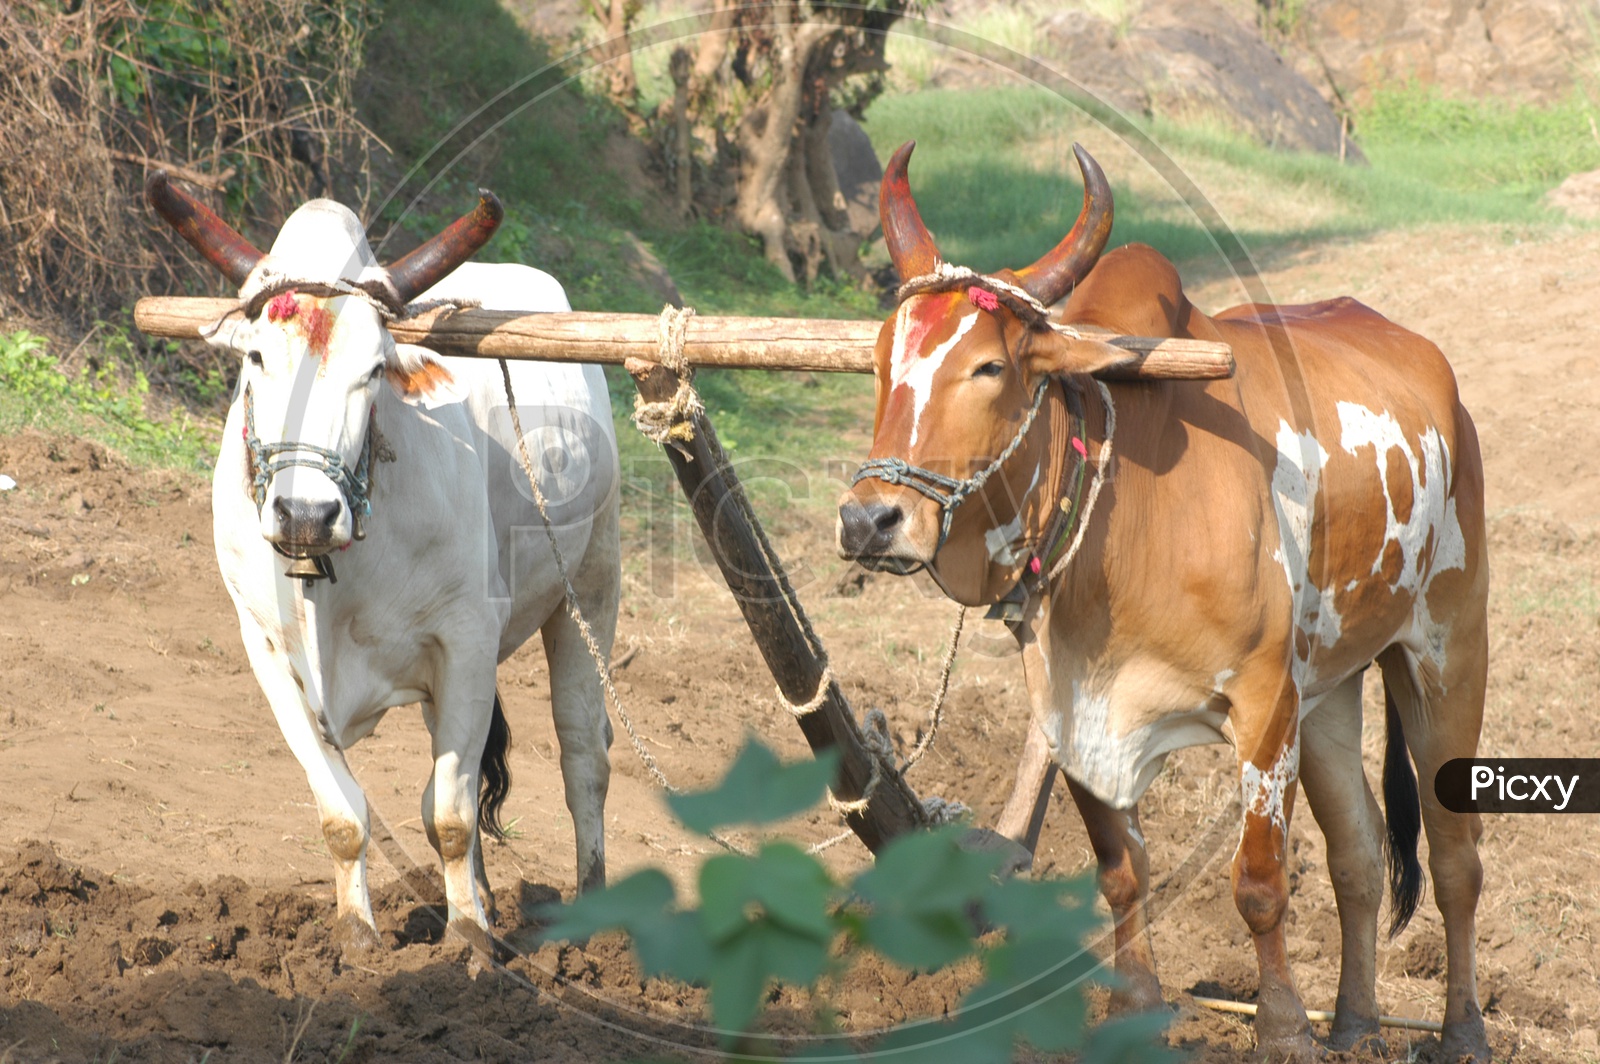 Agricultural Fields Ploughing With Bullocks in Old Traditional Way In Rural Villages